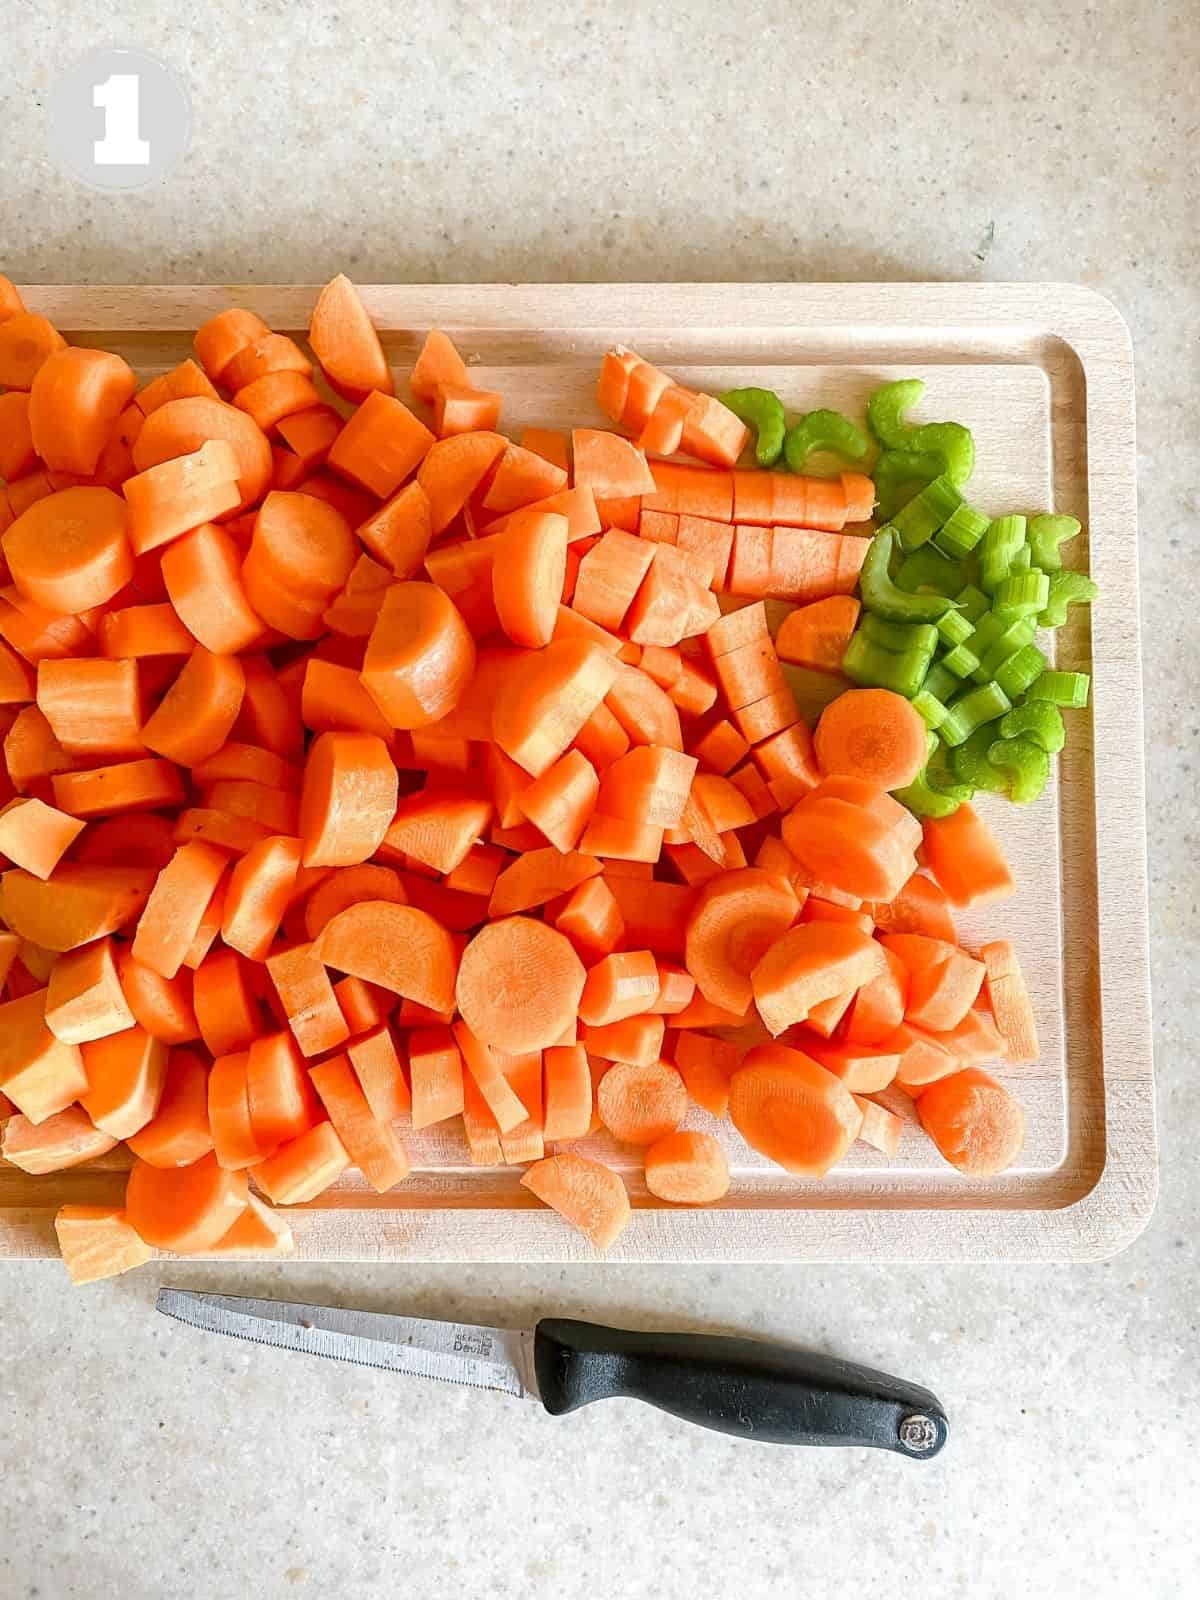 carrot and celery on a wooden chopping board next to a knife.